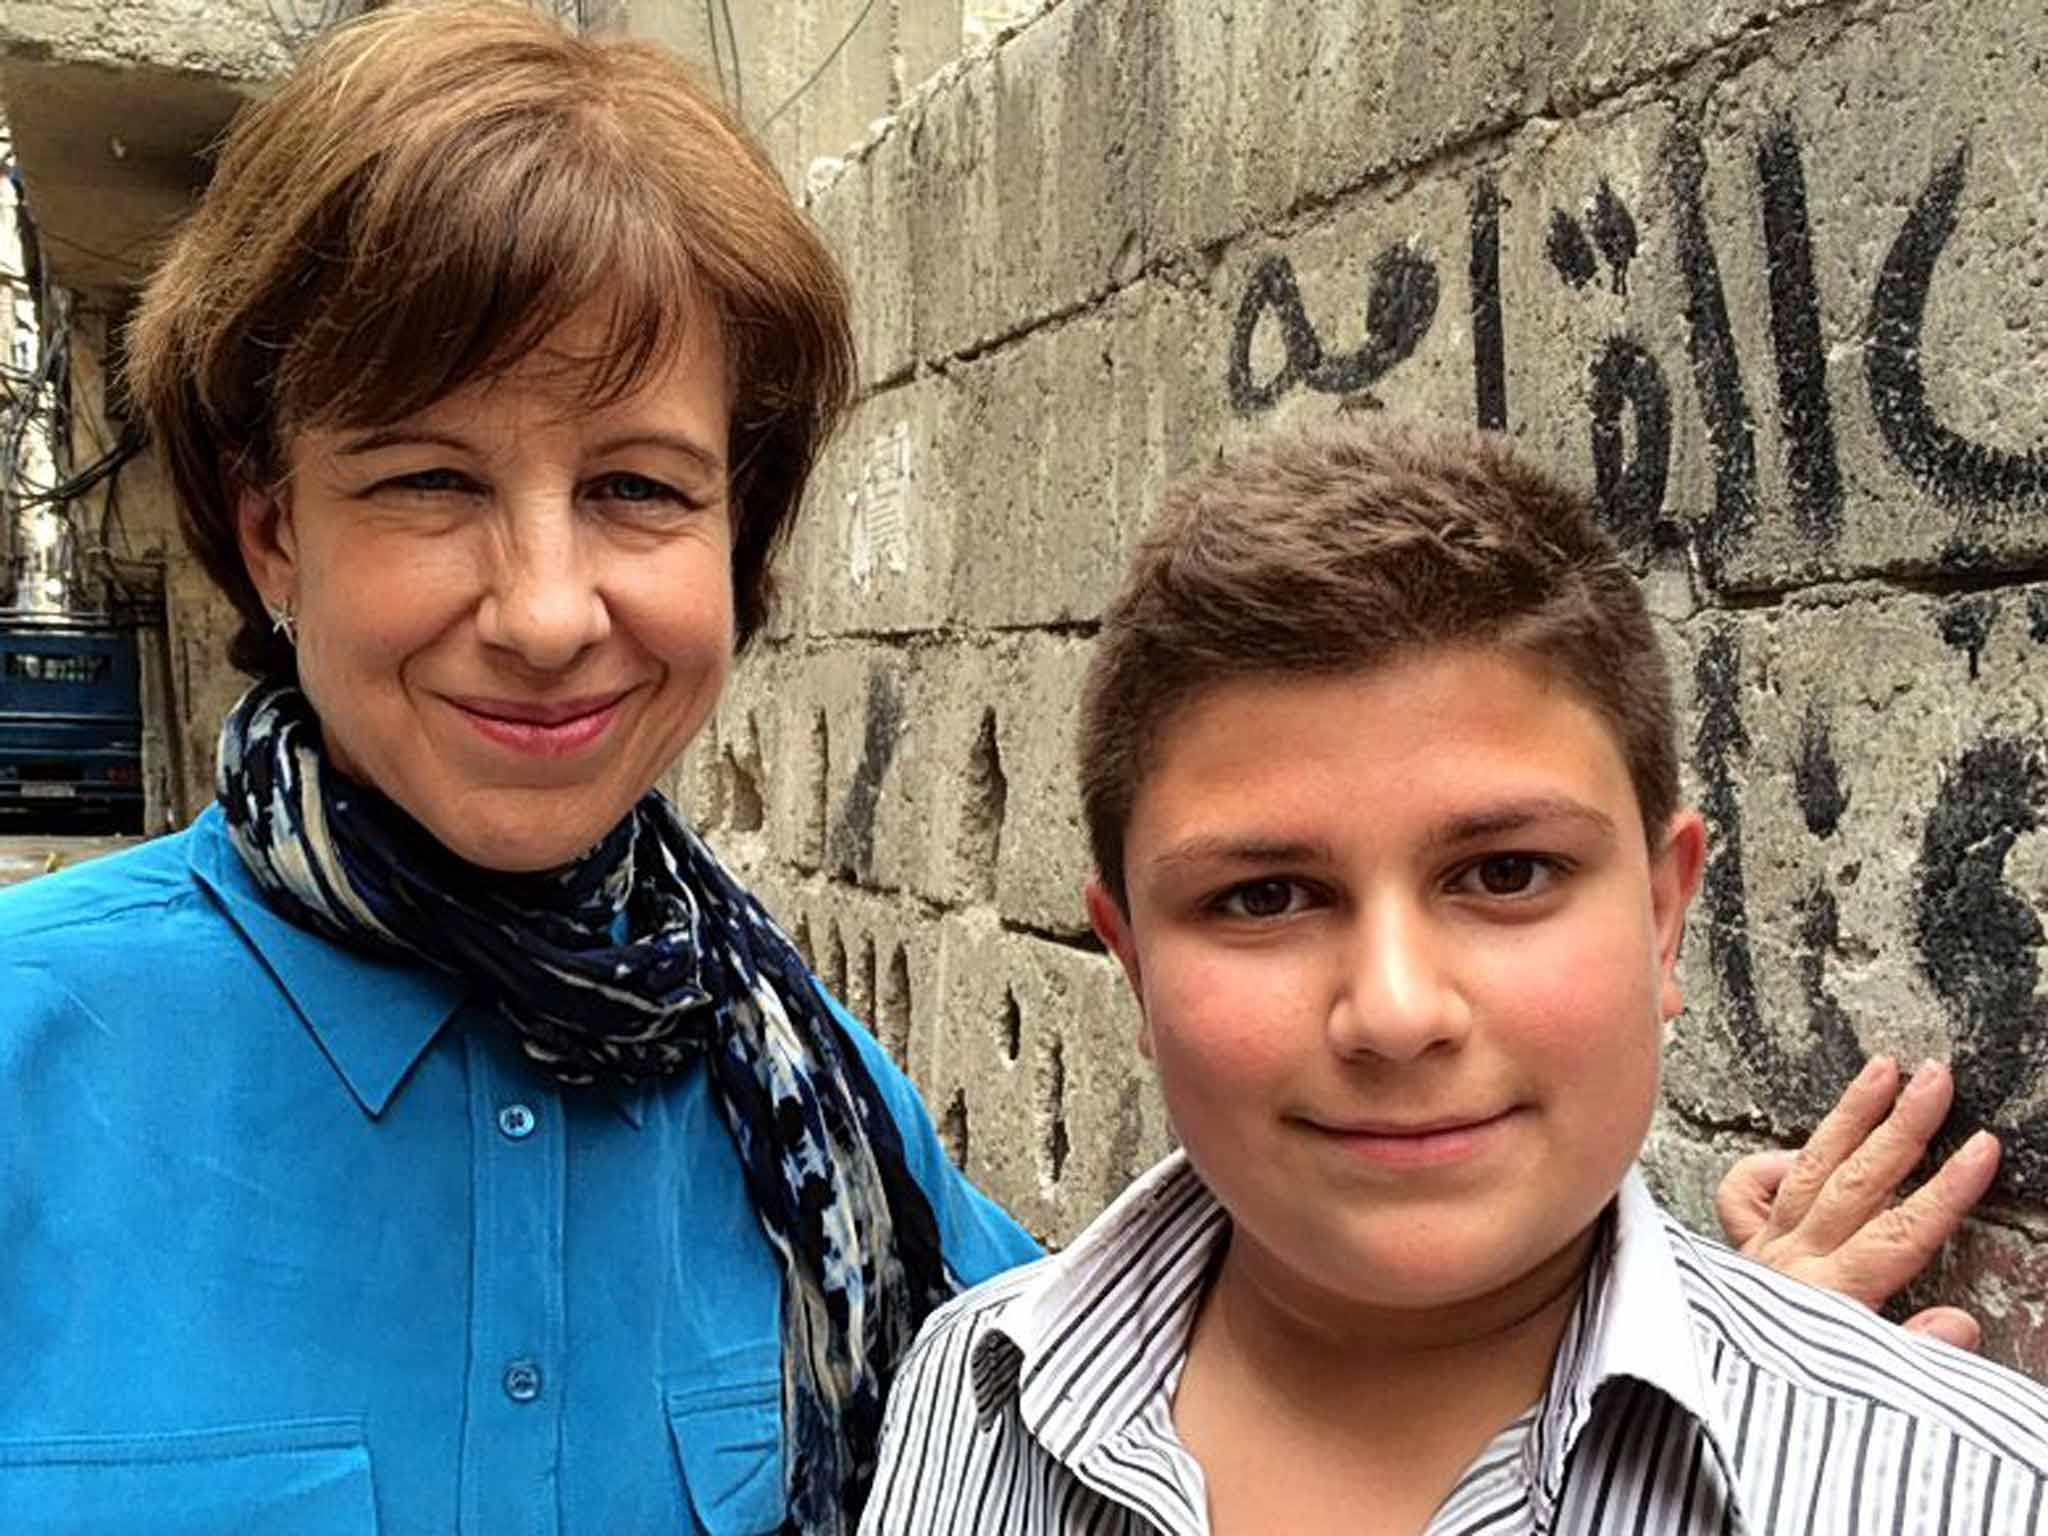 Back to the wall: Lyse Doucet with Jalal in 'Children of Syria'